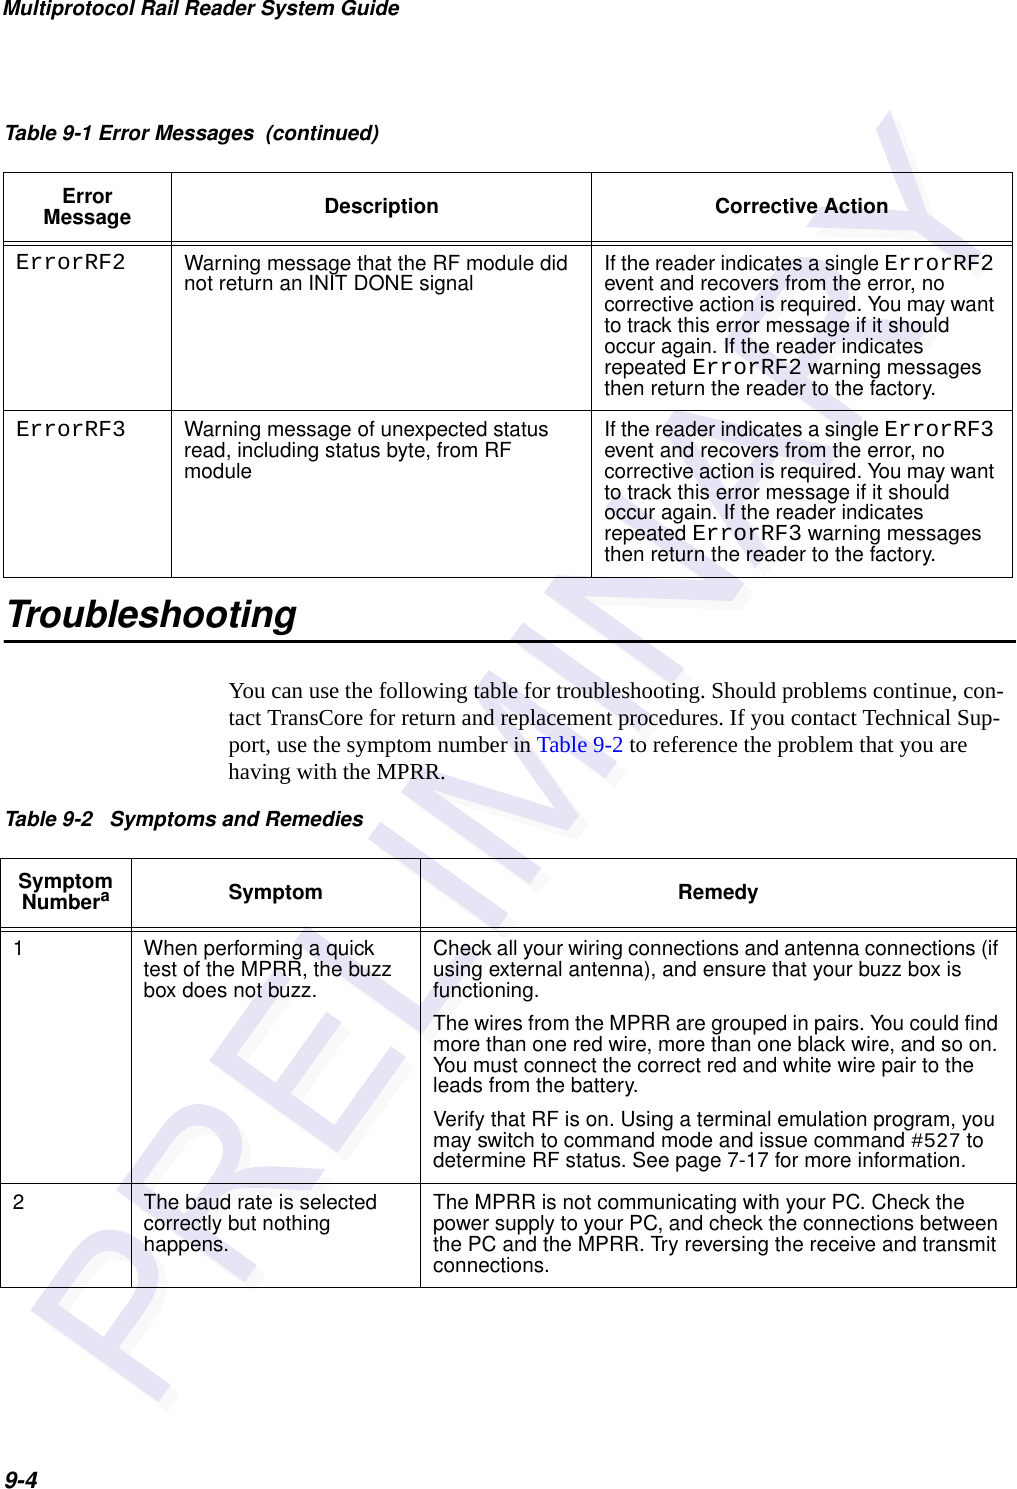 Multiprotocol Rail Reader System Guide9-4TroubleshootingYou can use the following table for troubleshooting. Should problems continue, con-tact TransCore for return and replacement procedures. If you contact Technical Sup-port, use the symptom number in Table 9-2 to reference the problem that you are having with the MPRR. ErrorRF2 Warning message that the RF module did not return an INIT DONE signal If the reader indicates a single ErrorRF2 event and recovers from the error, no corrective action is required. You may want to track this error message if it should occur again. If the reader indicates repeated ErrorRF2 warning messages then return the reader to the factory.ErrorRF3 Warning message of unexpected status read, including status byte, from RF moduleIf the reader indicates a single ErrorRF3 event and recovers from the error, no corrective action is required. You may want to track this error message if it should occur again. If the reader indicates repeated ErrorRF3 warning messages then return the reader to the factory.Table 9-1 Error Messages  (continued)Error Message Description Corrective ActionTable 9-2   Symptoms and RemediesSymptom NumberaSymptom Remedy1 When performing a quick test of the MPRR, the buzz box does not buzz.Check all your wiring connections and antenna connections (if using external antenna), and ensure that your buzz box is functioning. The wires from the MPRR are grouped in pairs. You could find more than one red wire, more than one black wire, and so on. You must connect the correct red and white wire pair to the leads from the battery. Verify that RF is on. Using a terminal emulation program, you may switch to command mode and issue command #527 to determine RF status. See page 7-17 for more information.2 The baud rate is selected correctly but nothing happens.The MPRR is not communicating with your PC. Check the power supply to your PC, and check the connections between the PC and the MPRR. Try reversing the receive and transmit connections.